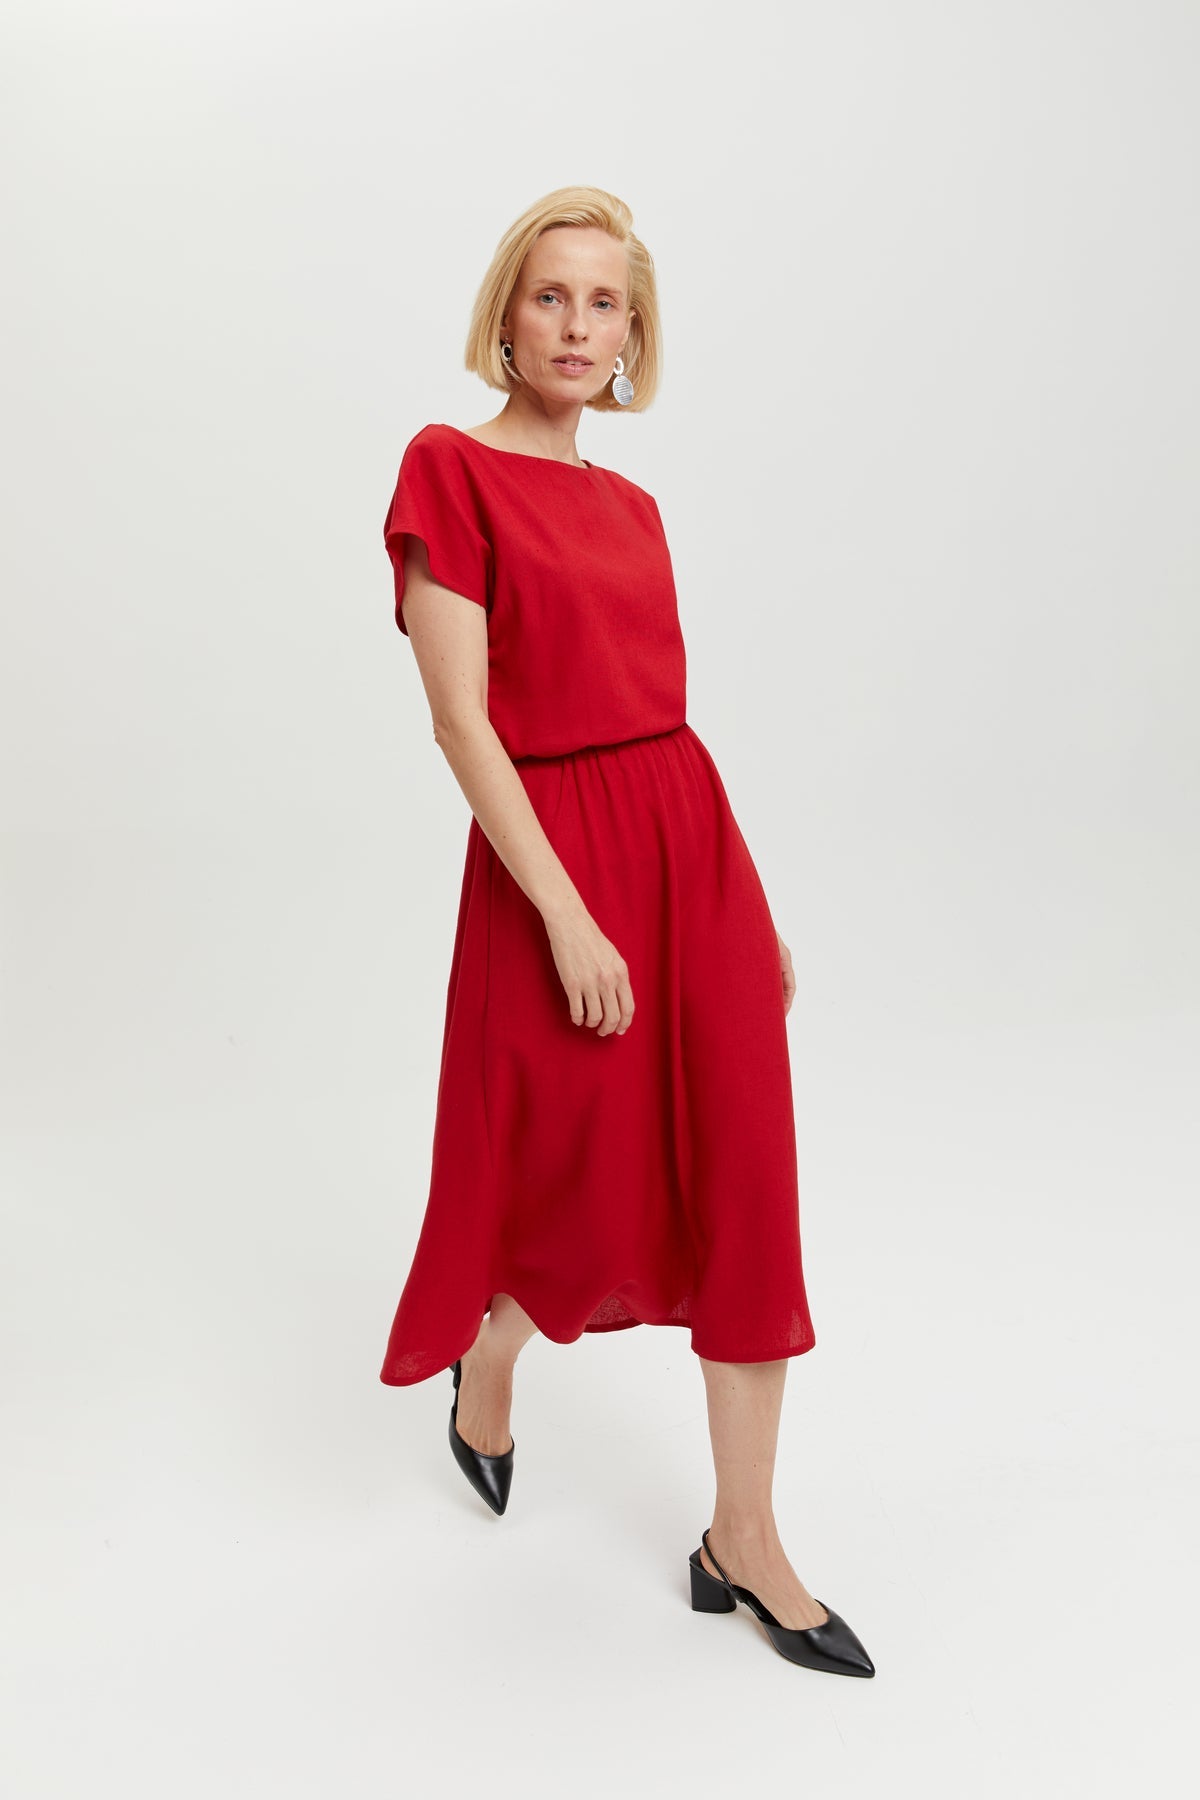 Nane | Linen dress with short sleeves in red by Ayani